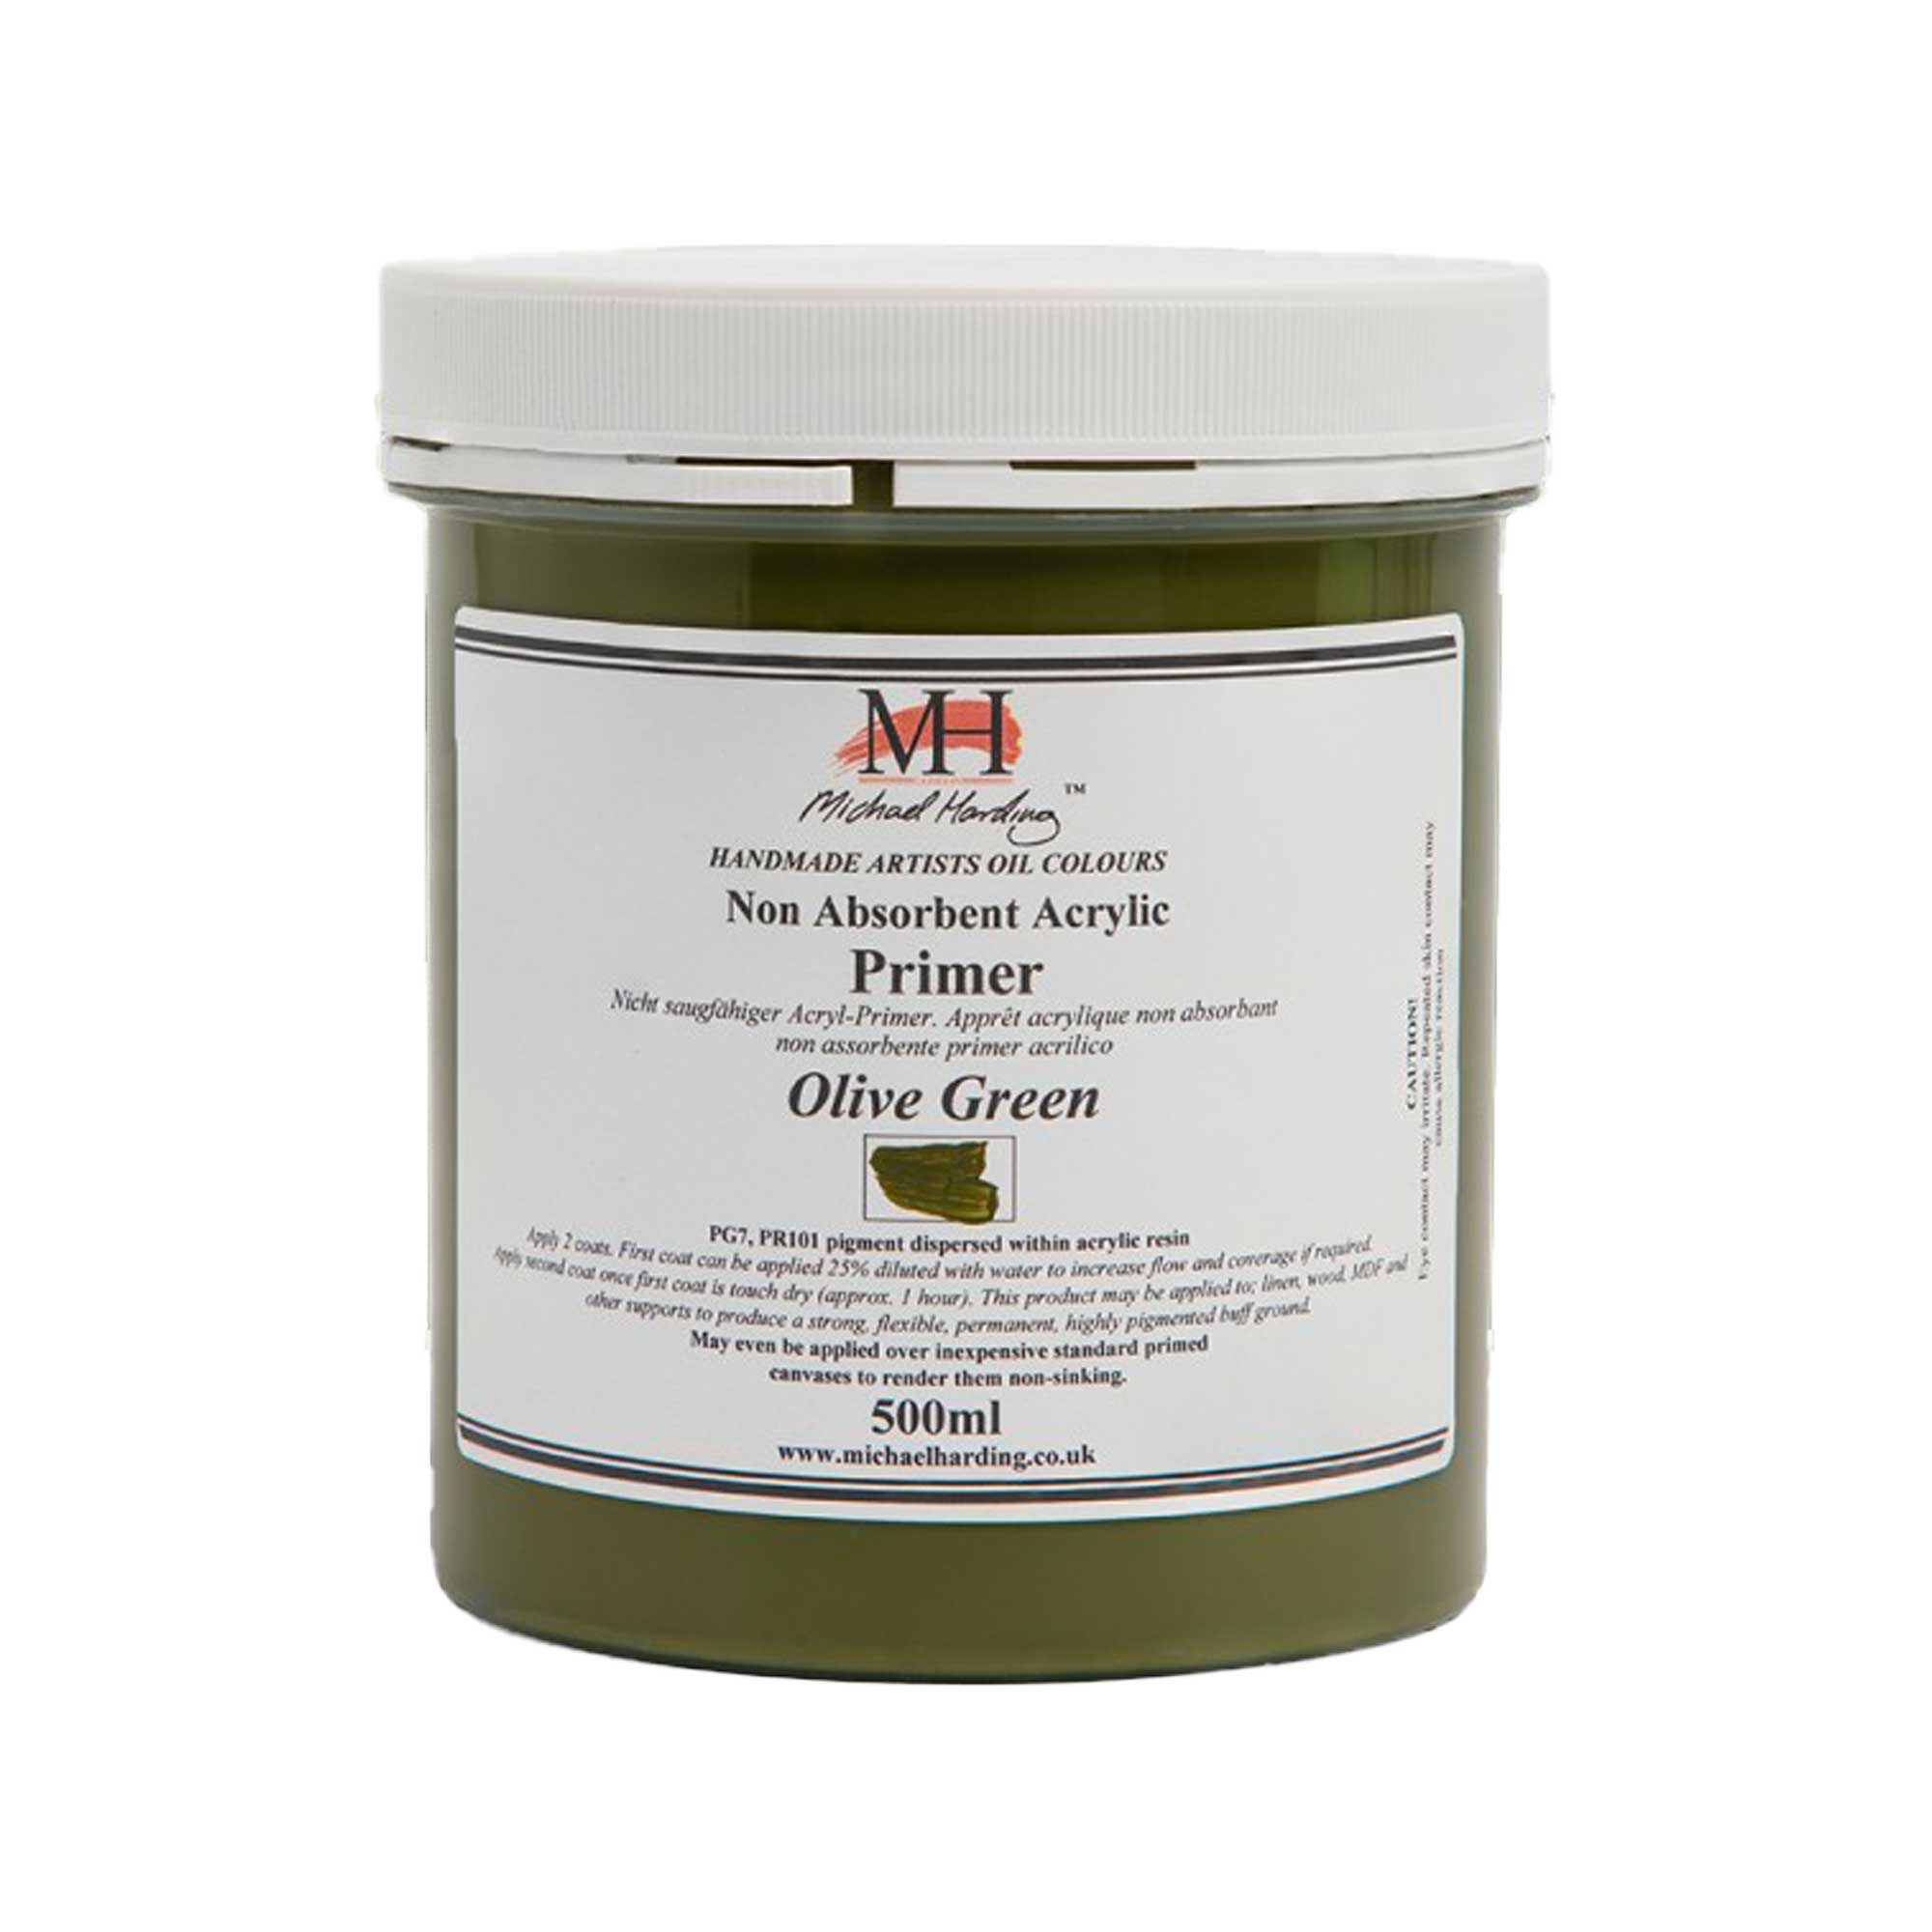 Michael Harding Non-Absorbent Acrylic Primer - Olive Green - 500ml